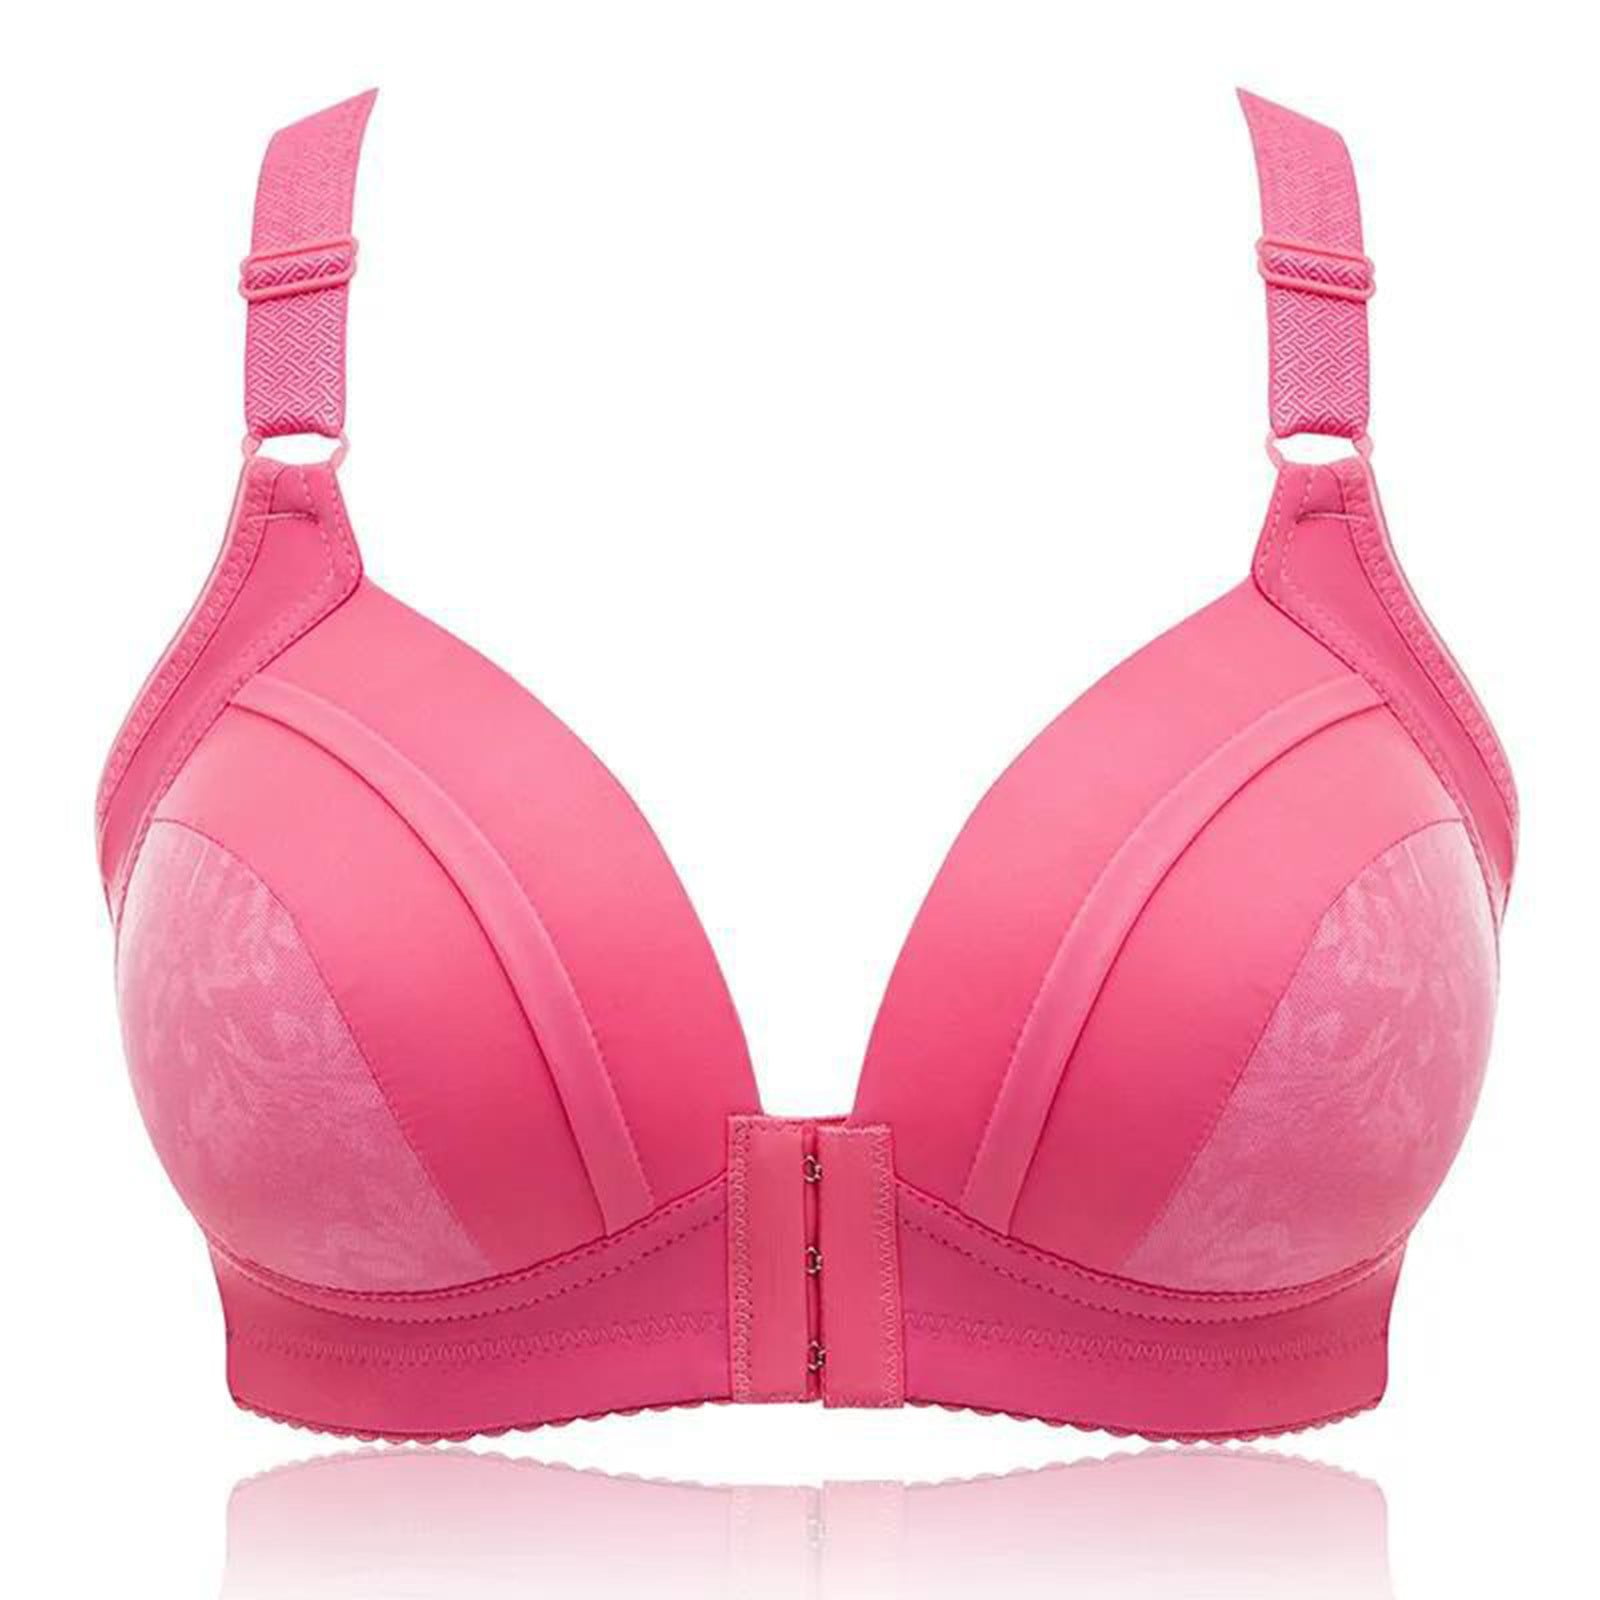 qucoqpe Front Closure Bras Women Posture Bras with Back Support Full  Coverage Wireless Tops Adjustable Posture Corrector 